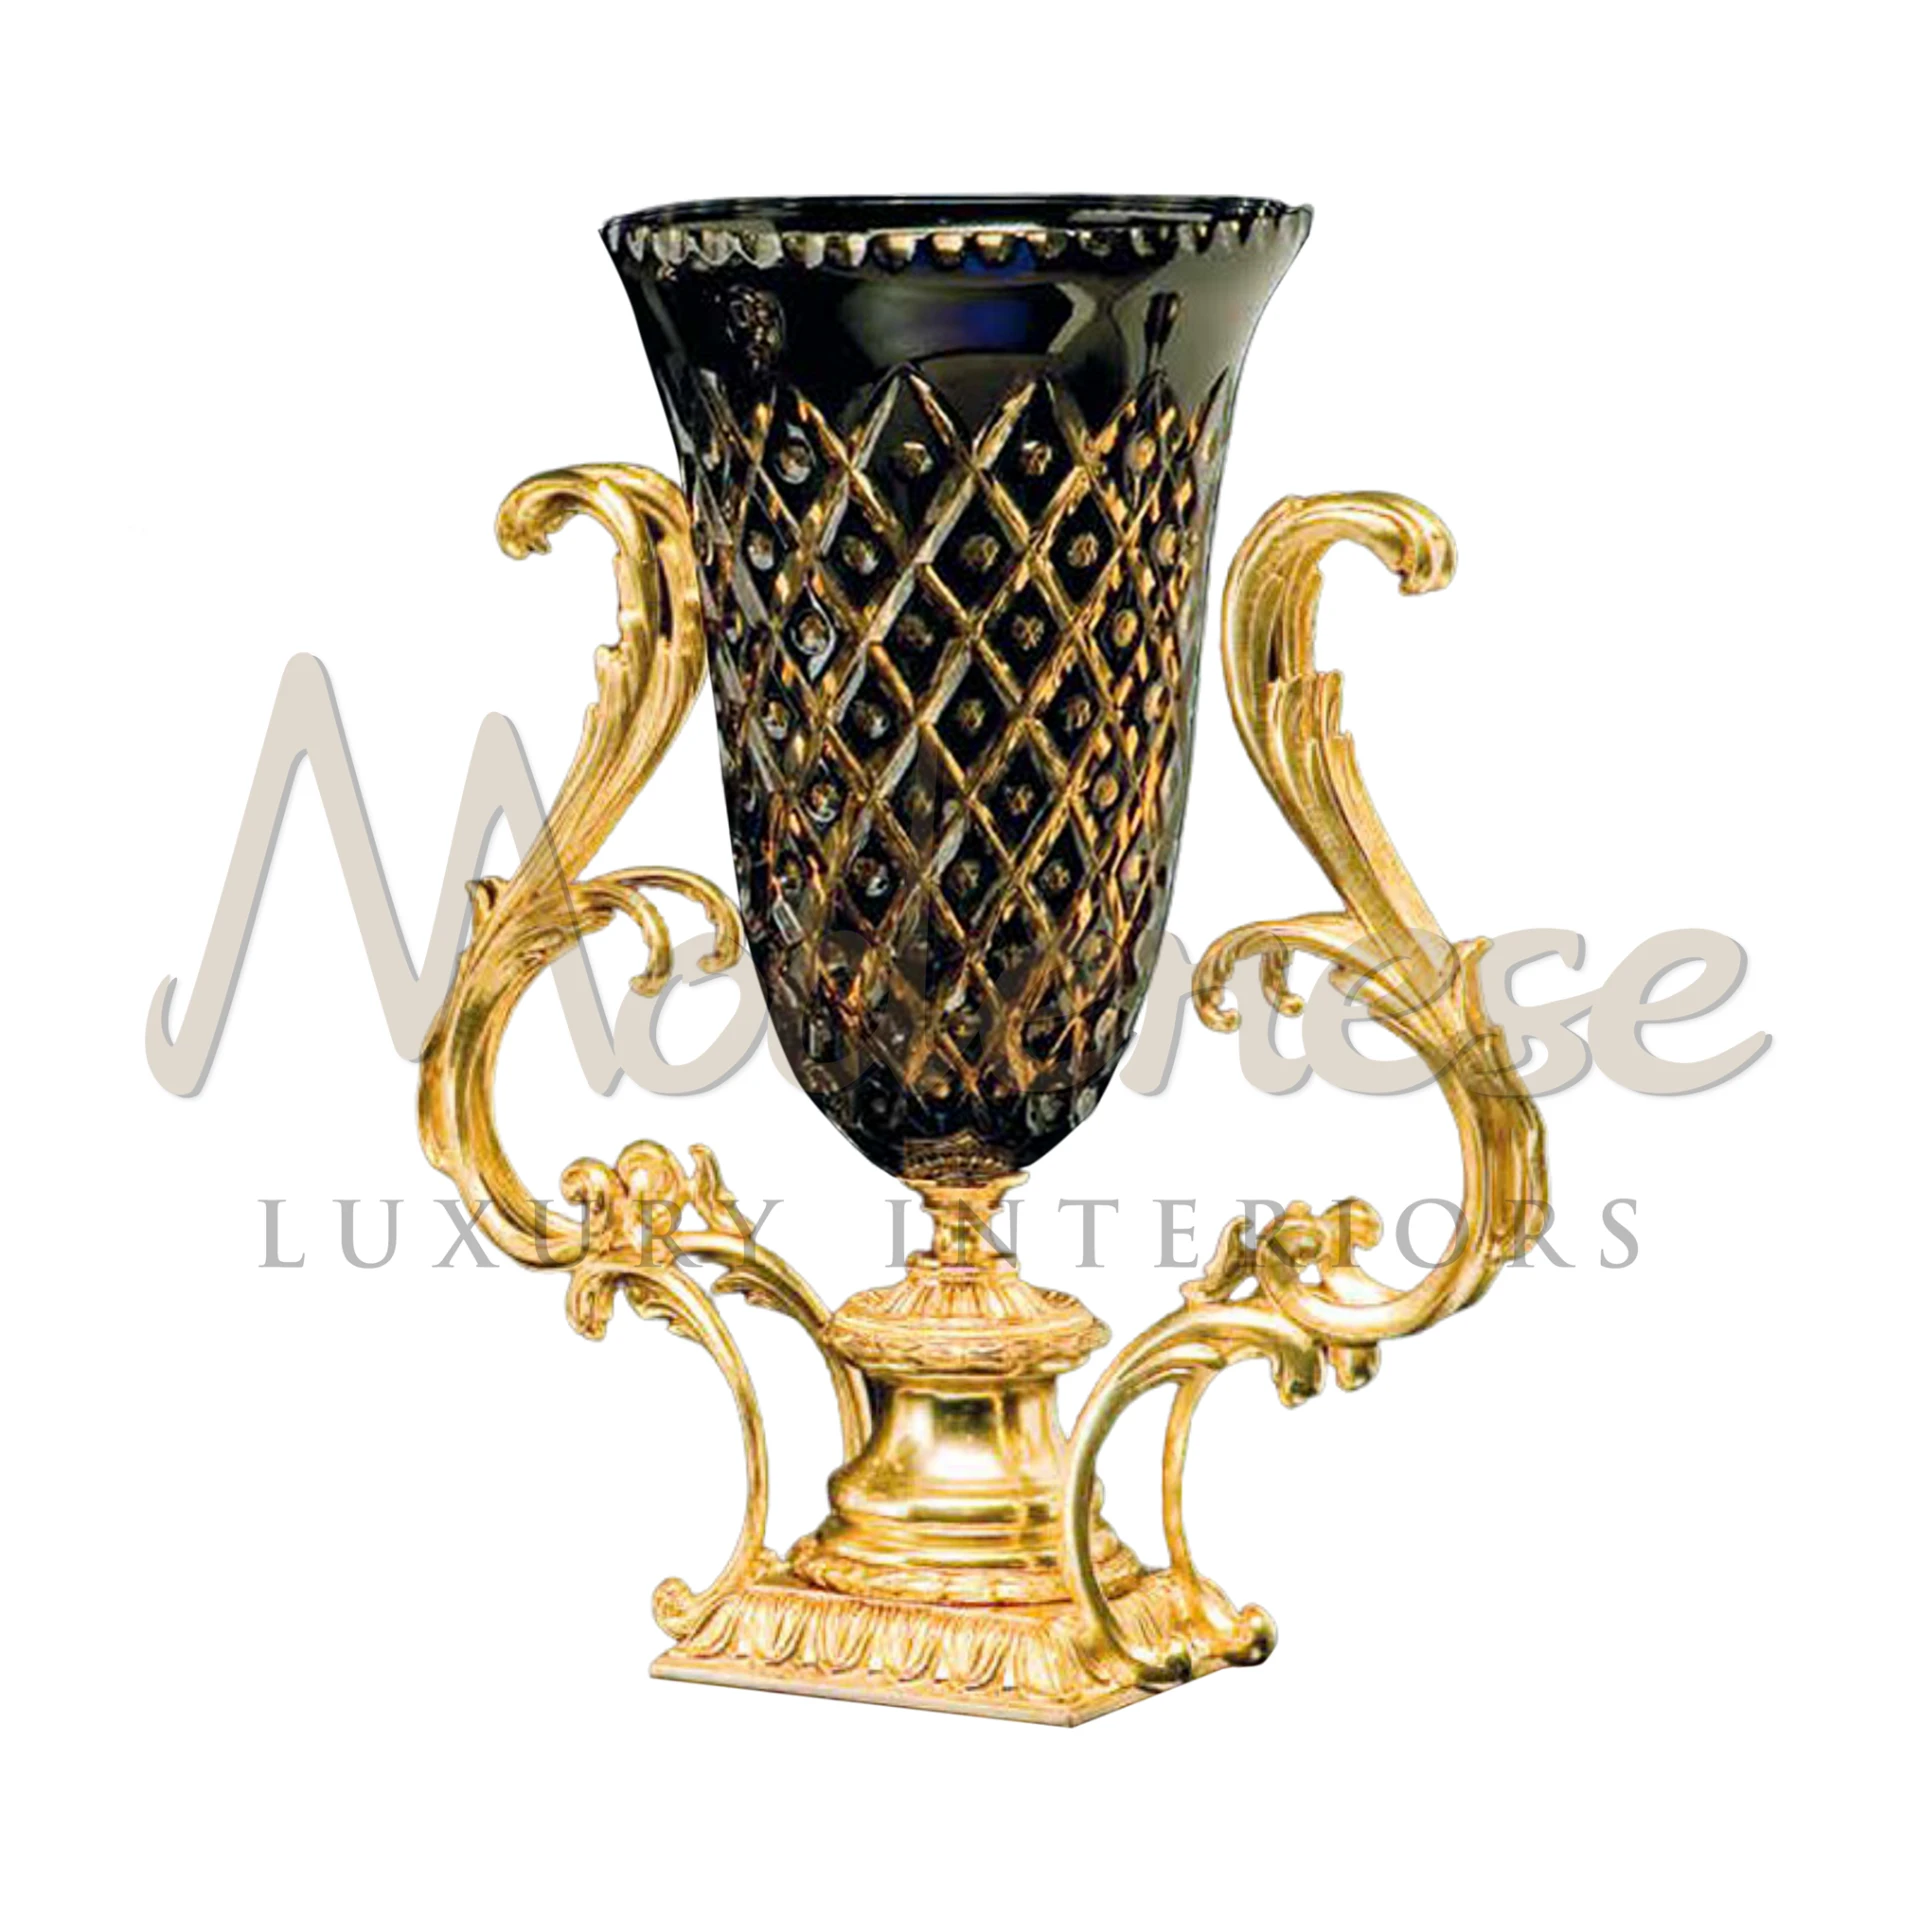 Elegant Luxury Tall Two-Handled Vase by Modenese Furniture, combining classic and baroque styles in high-quality glass.